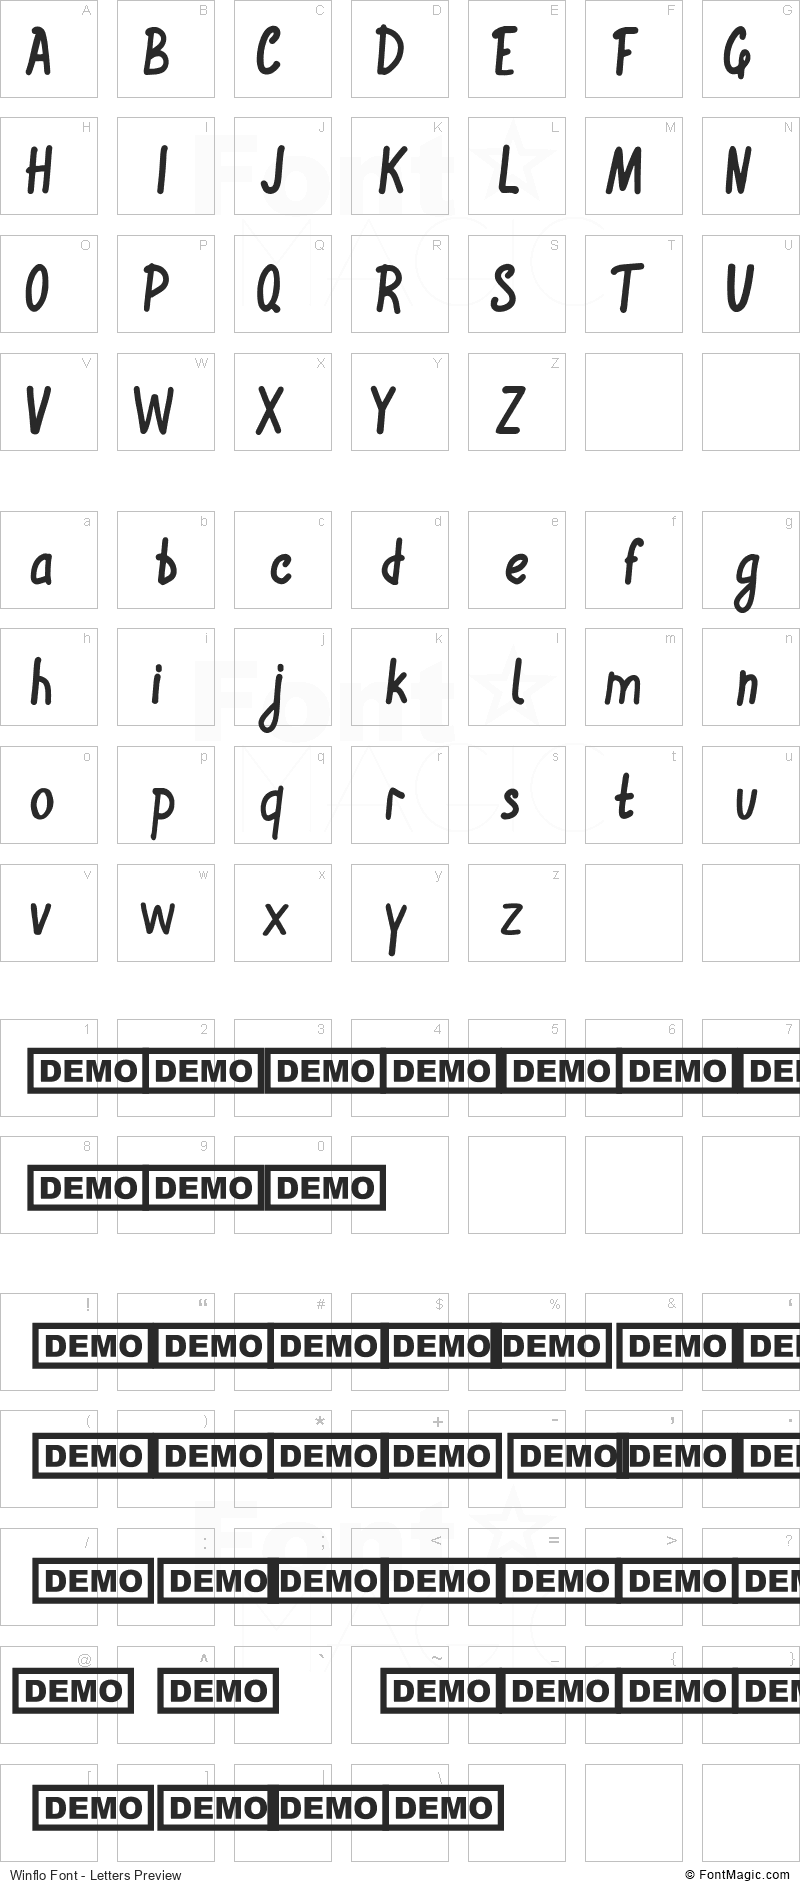 Winflo Font - All Latters Preview Chart